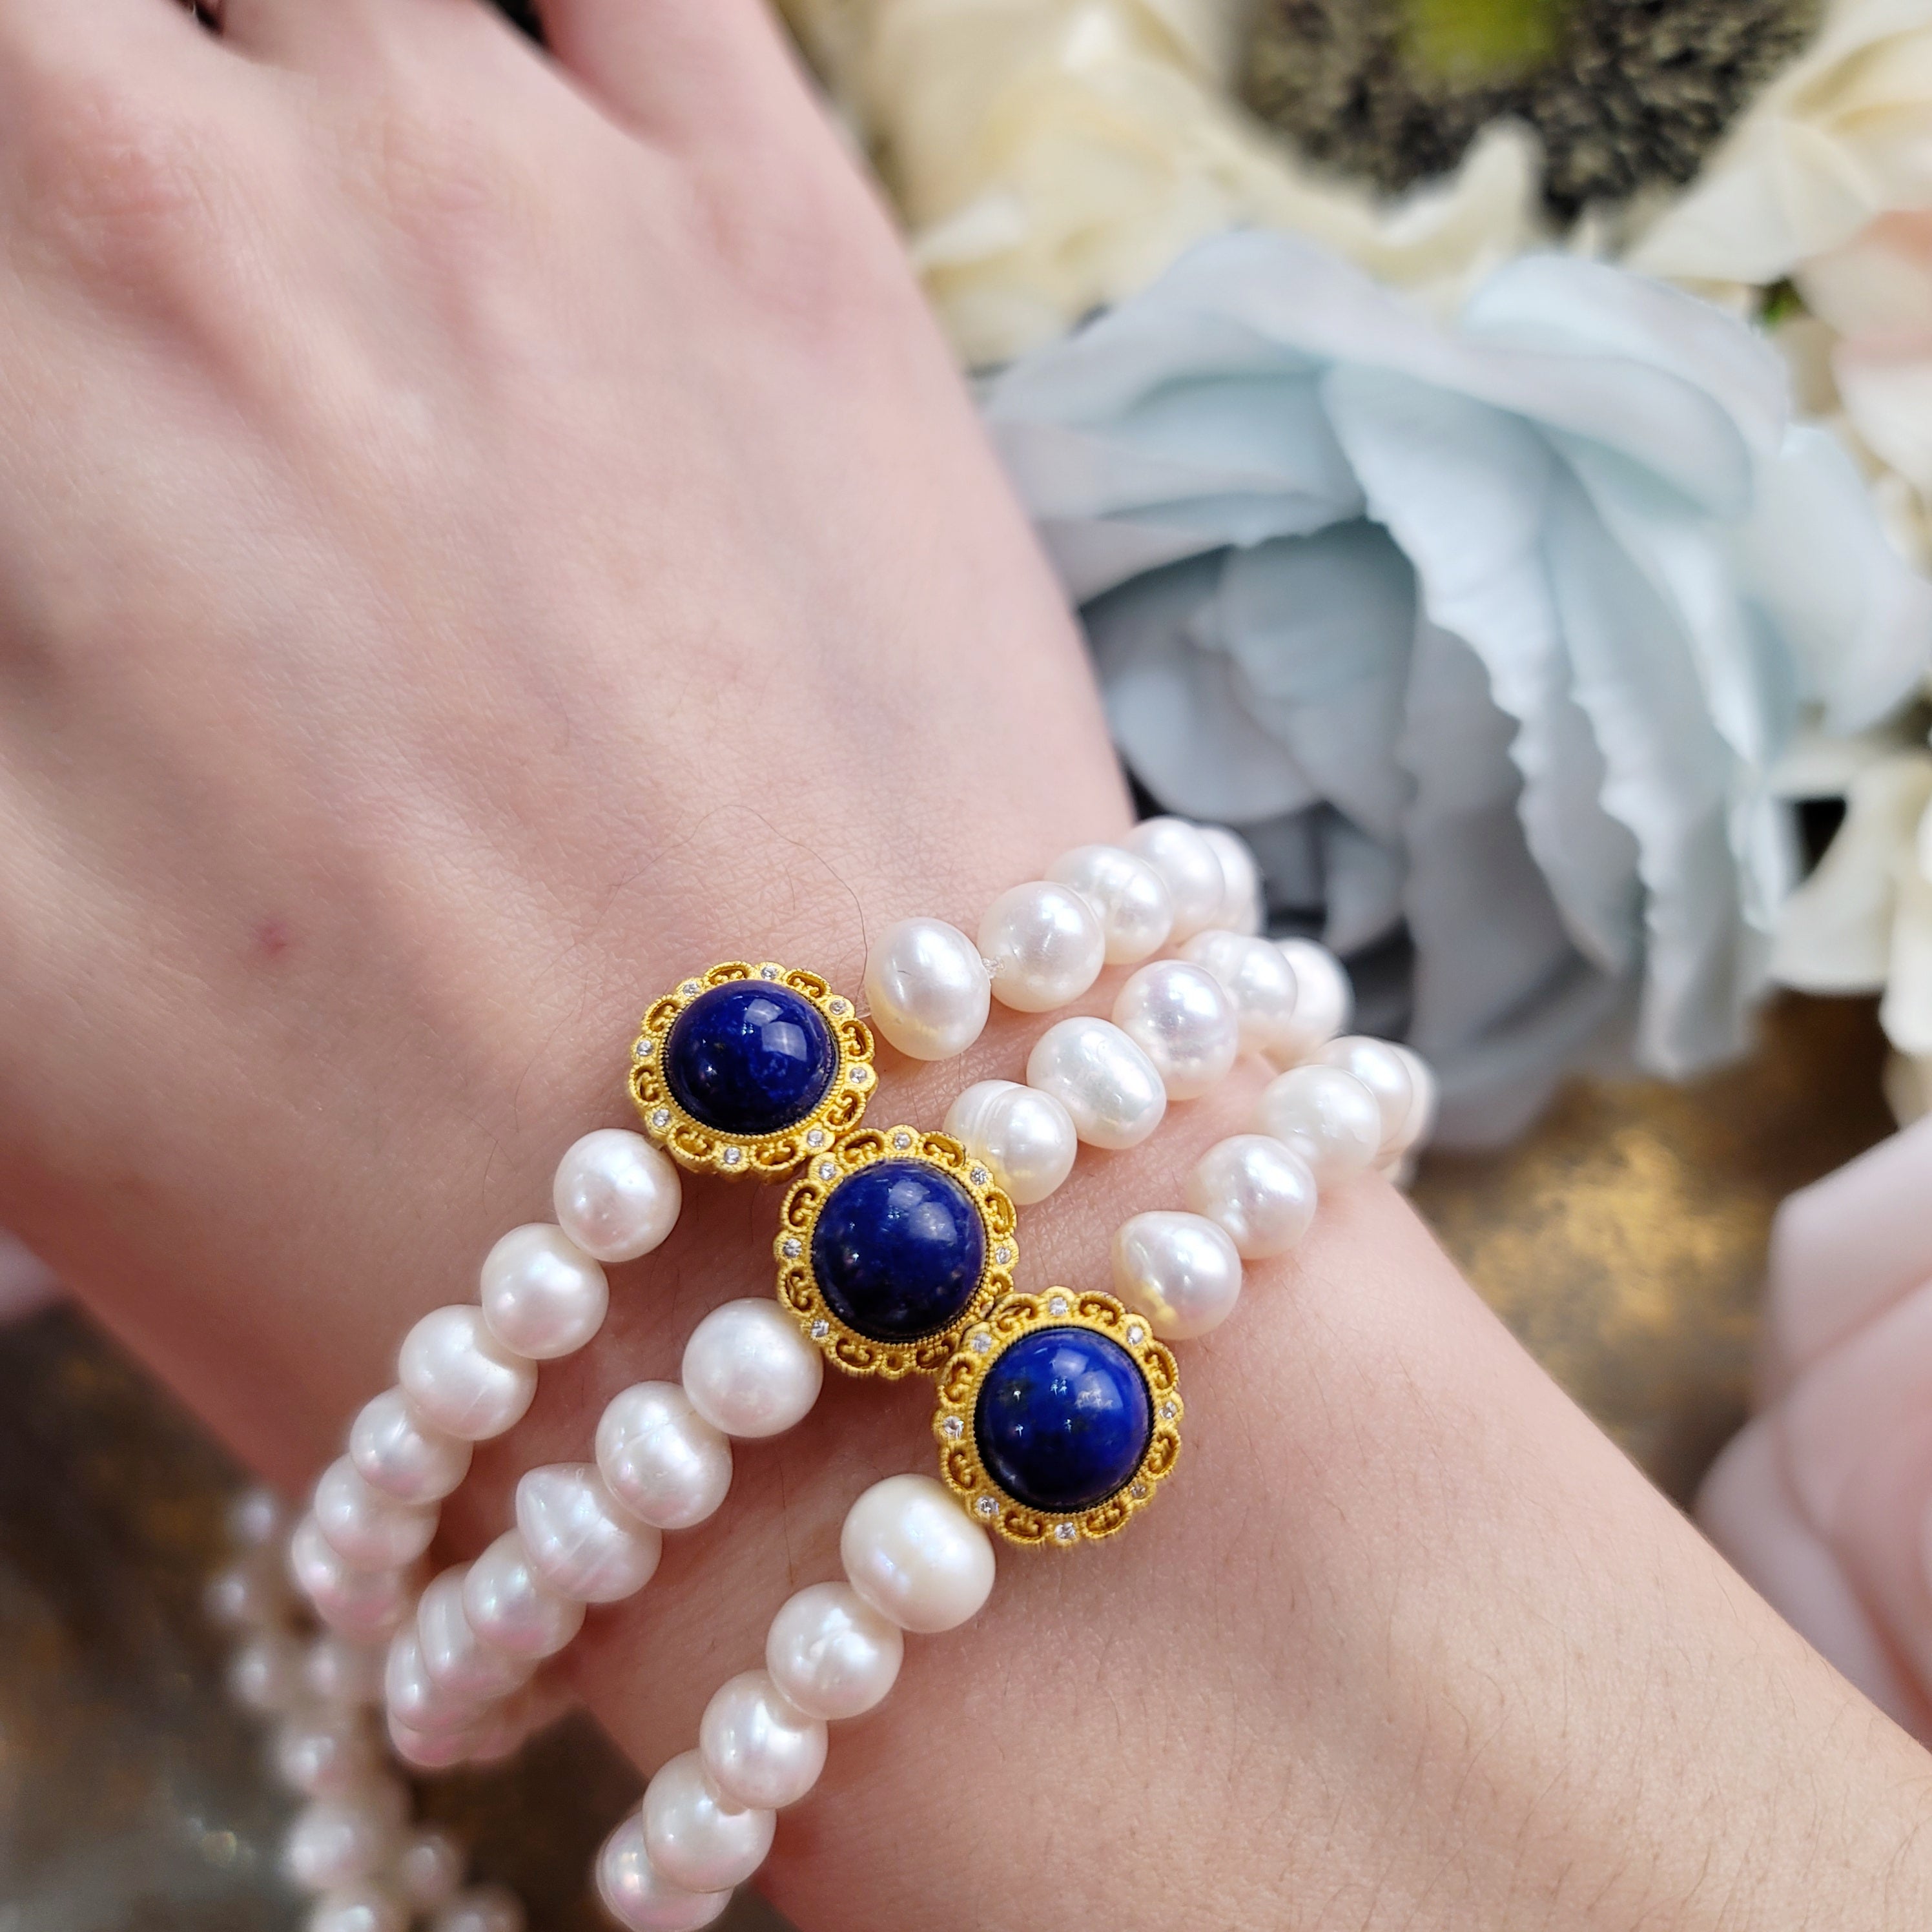 Lapis Lazuli Pearl Goddess Bracelet for Confidence, Intuition and Power